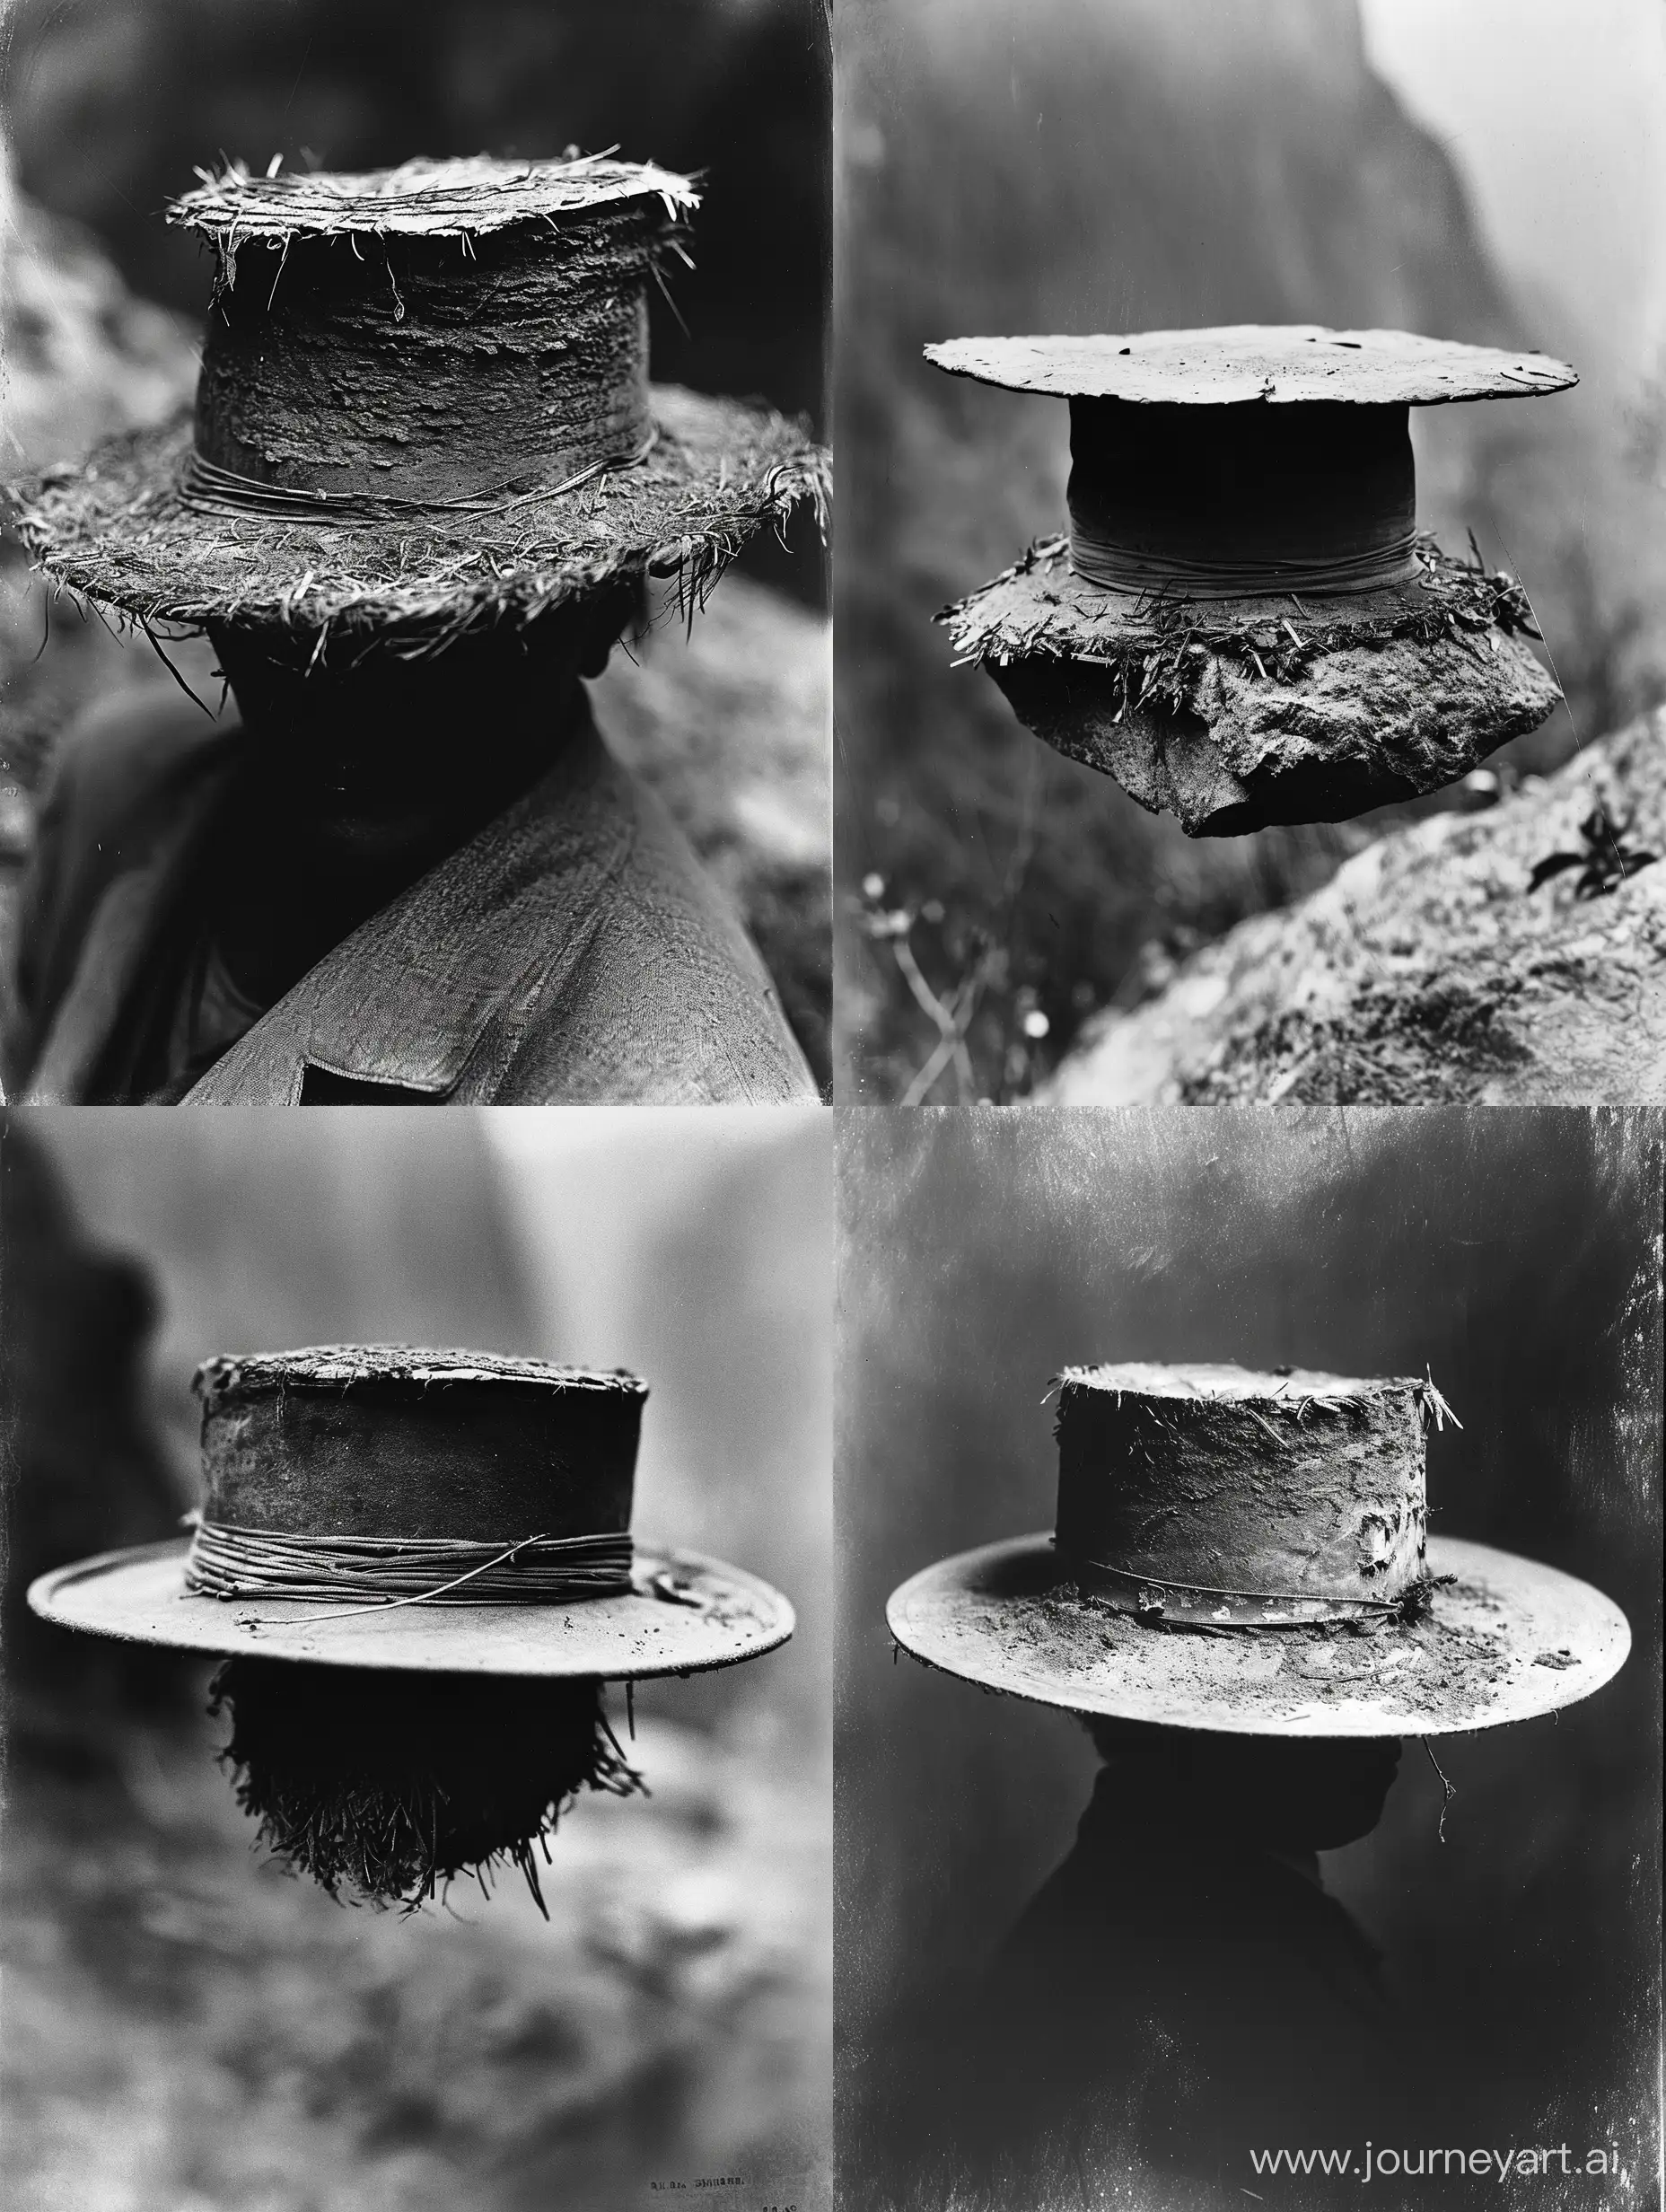 Historical black and white photographs depicting a worn-out hat of a Chinese immigrant worker at Yosemite in the late 1800s.